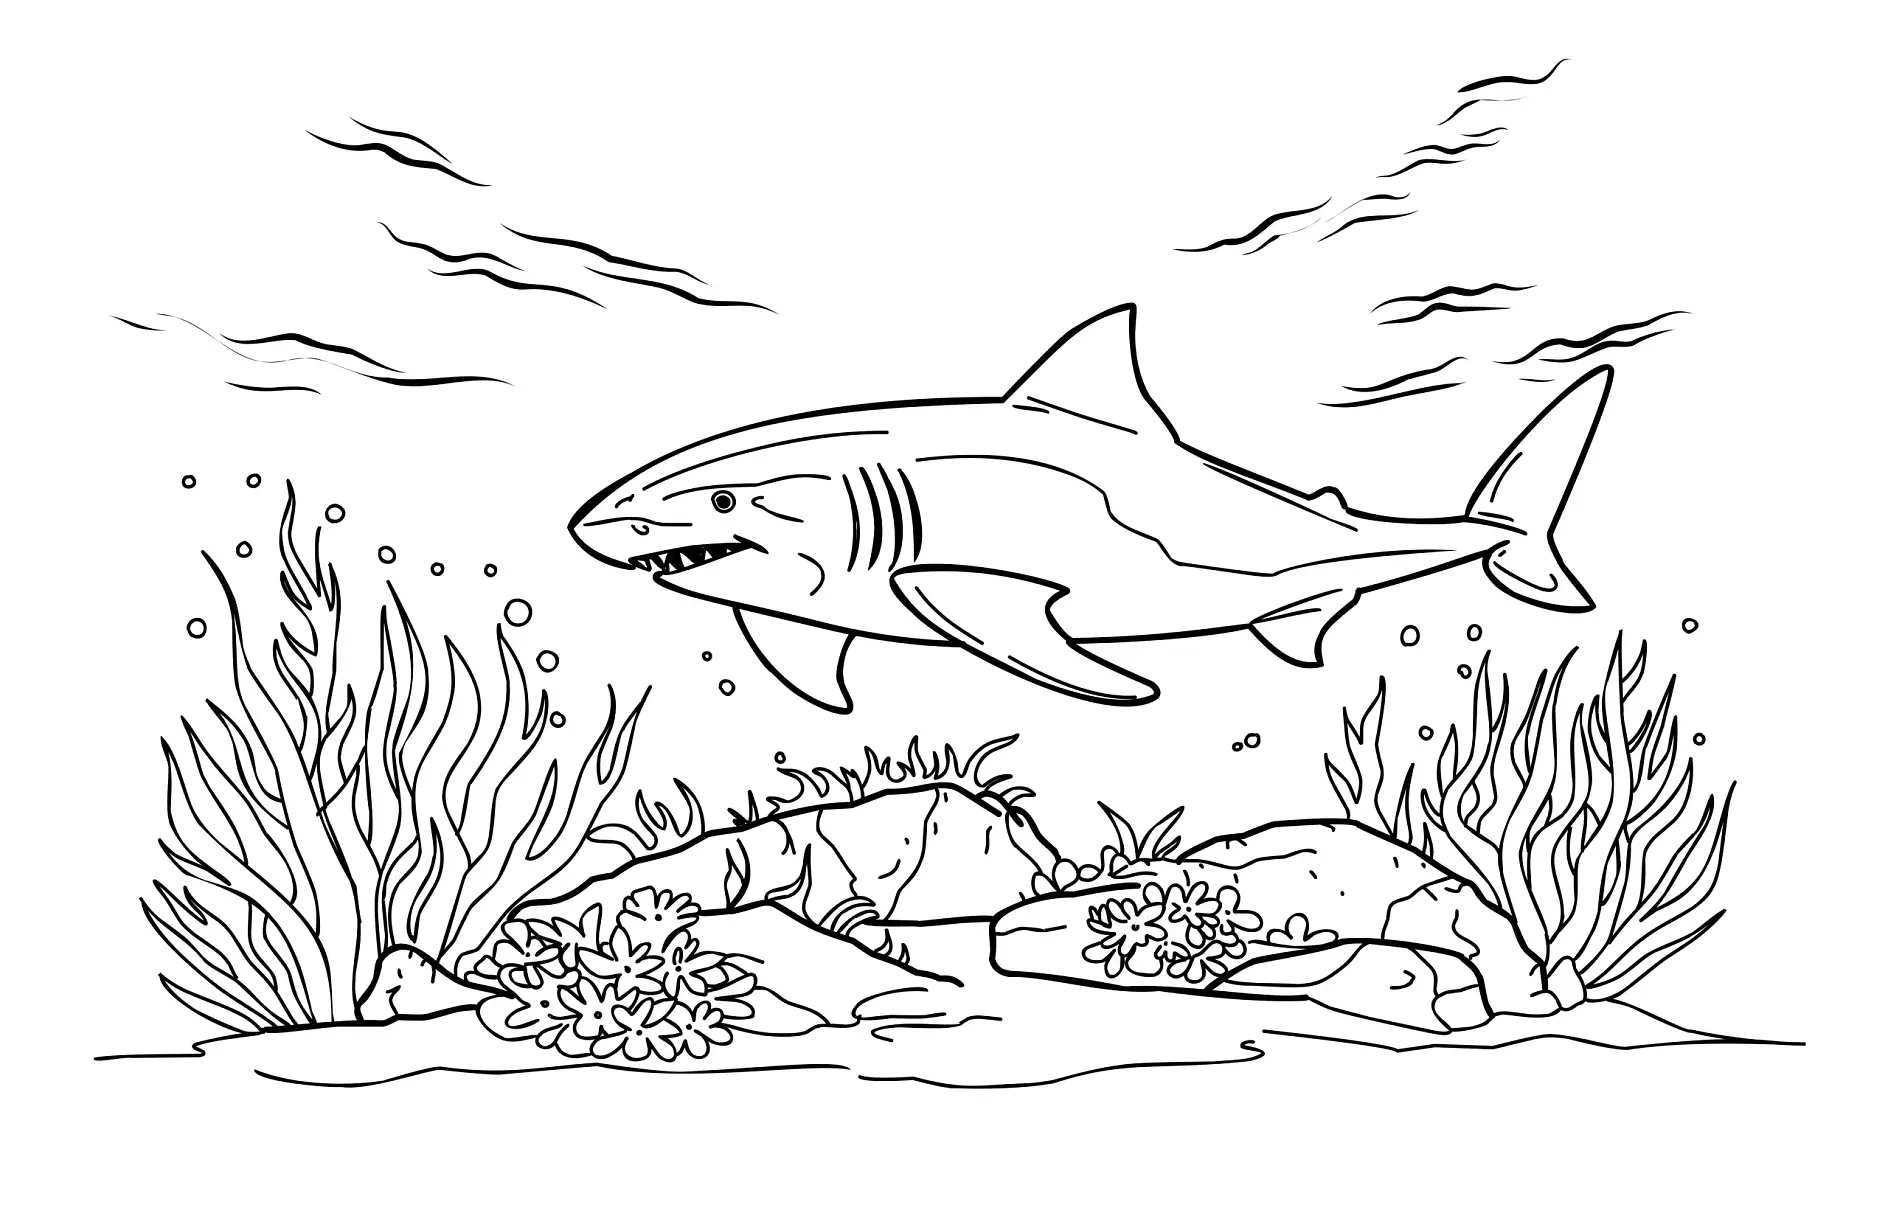 Coloring page shark. Coloring page life in the ocean with algae